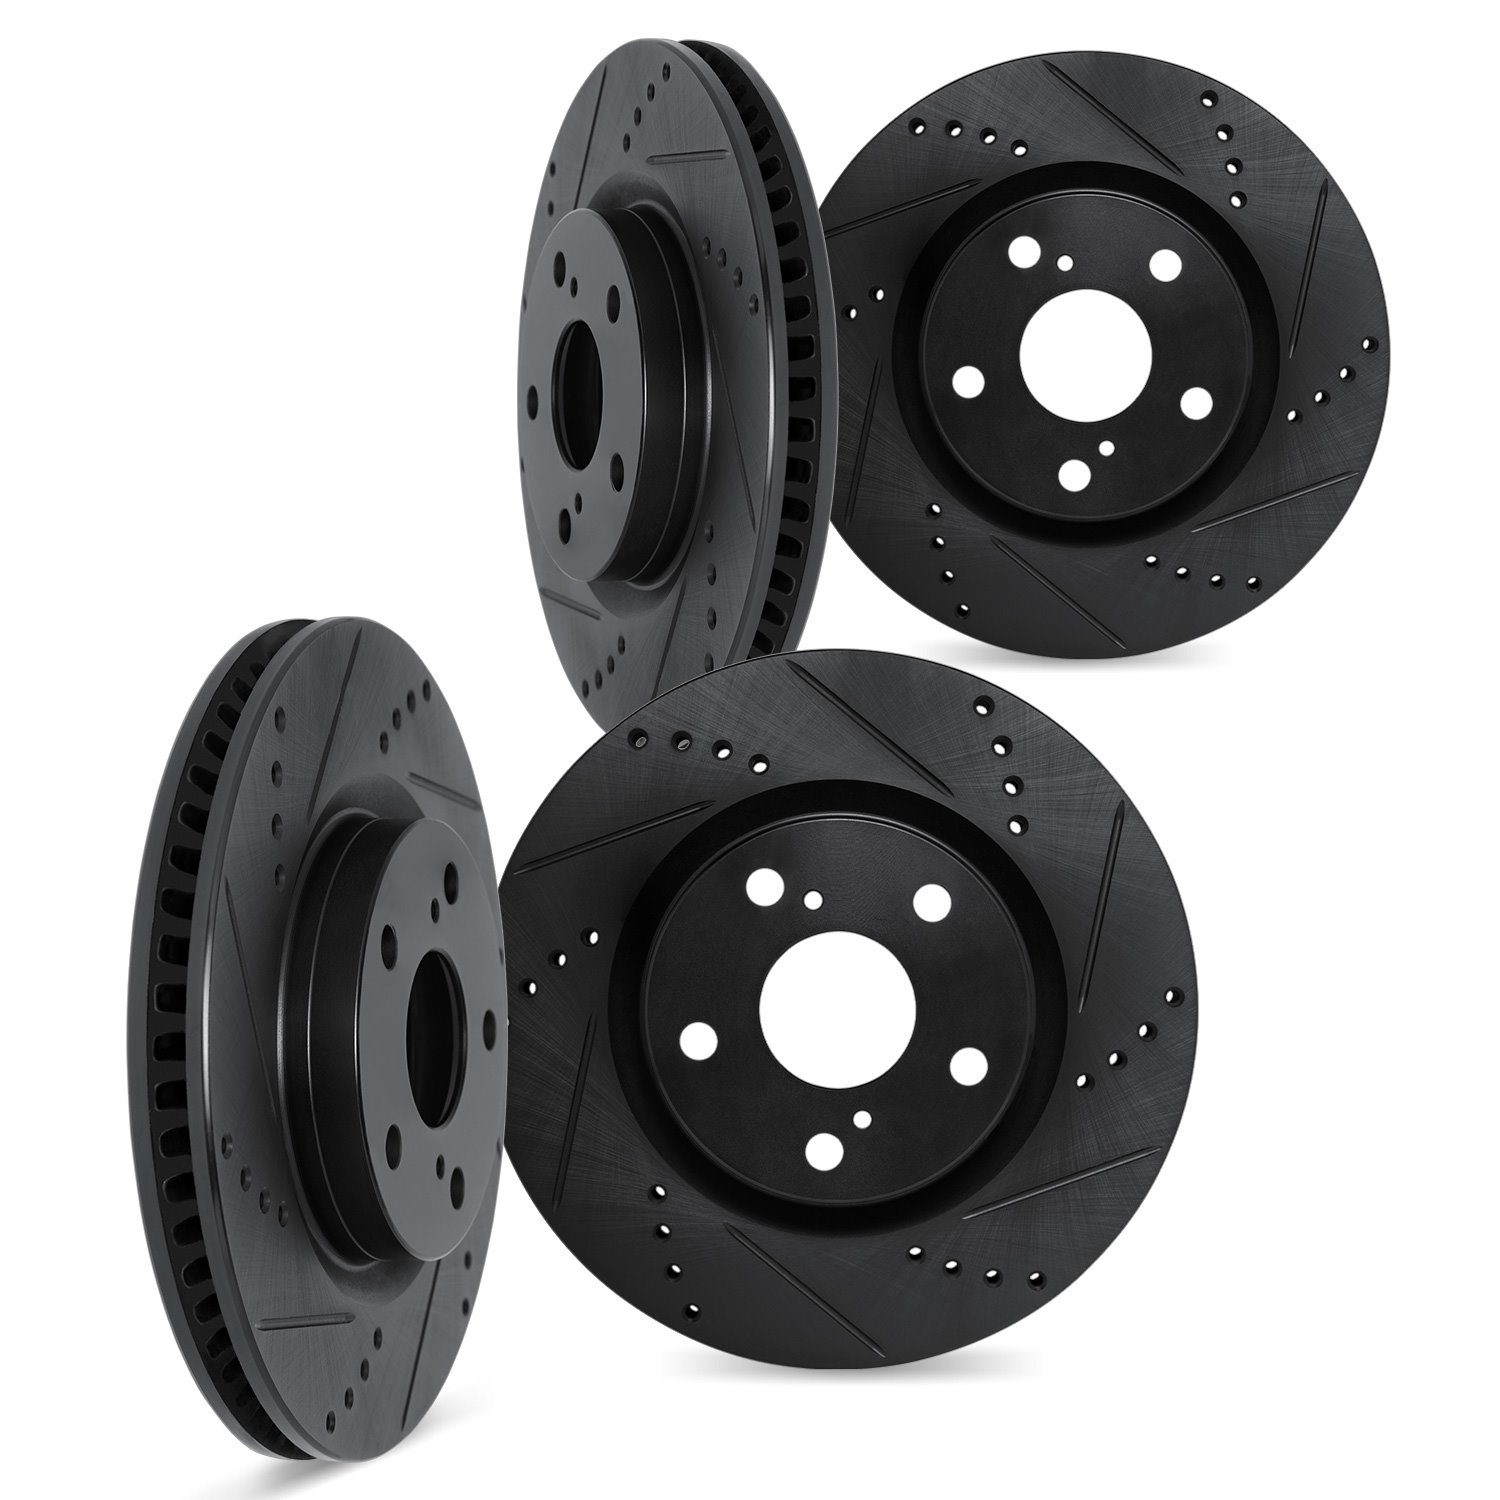 8004-46043 Drilled/Slotted Brake Rotors [Black], Fits Select GM, Position: Front and Rear